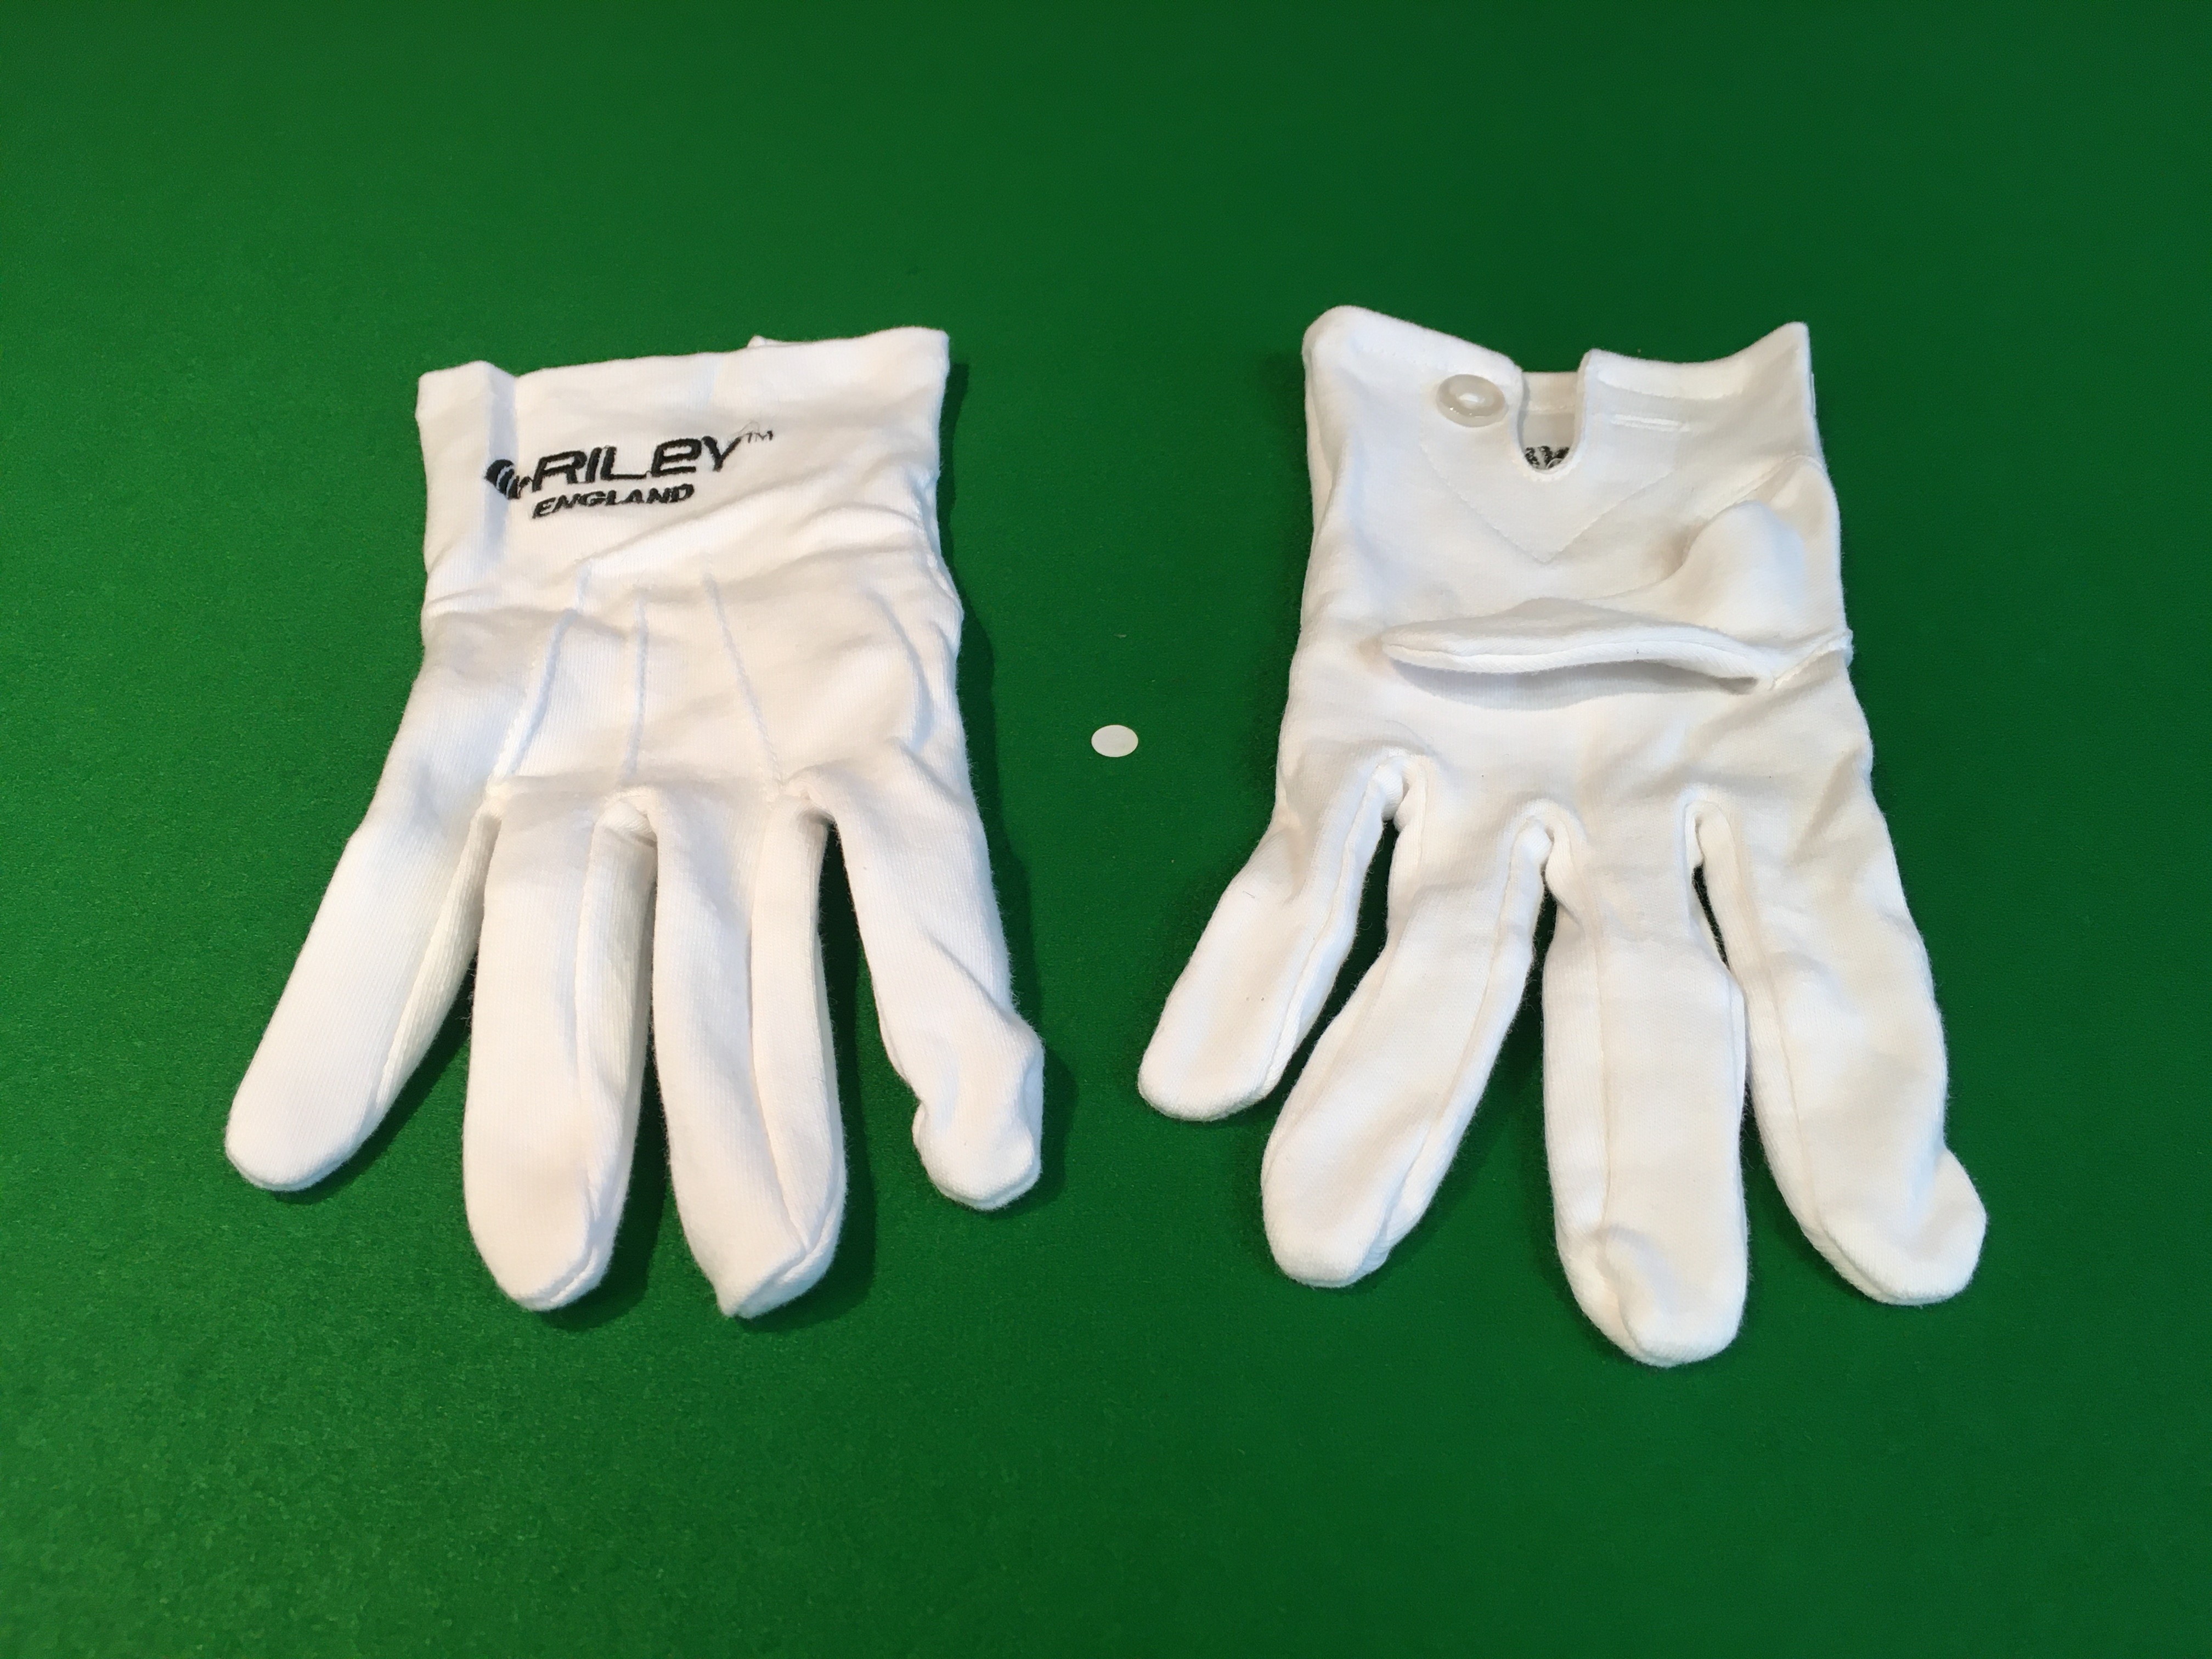 snooker pool referee gloves by riley 